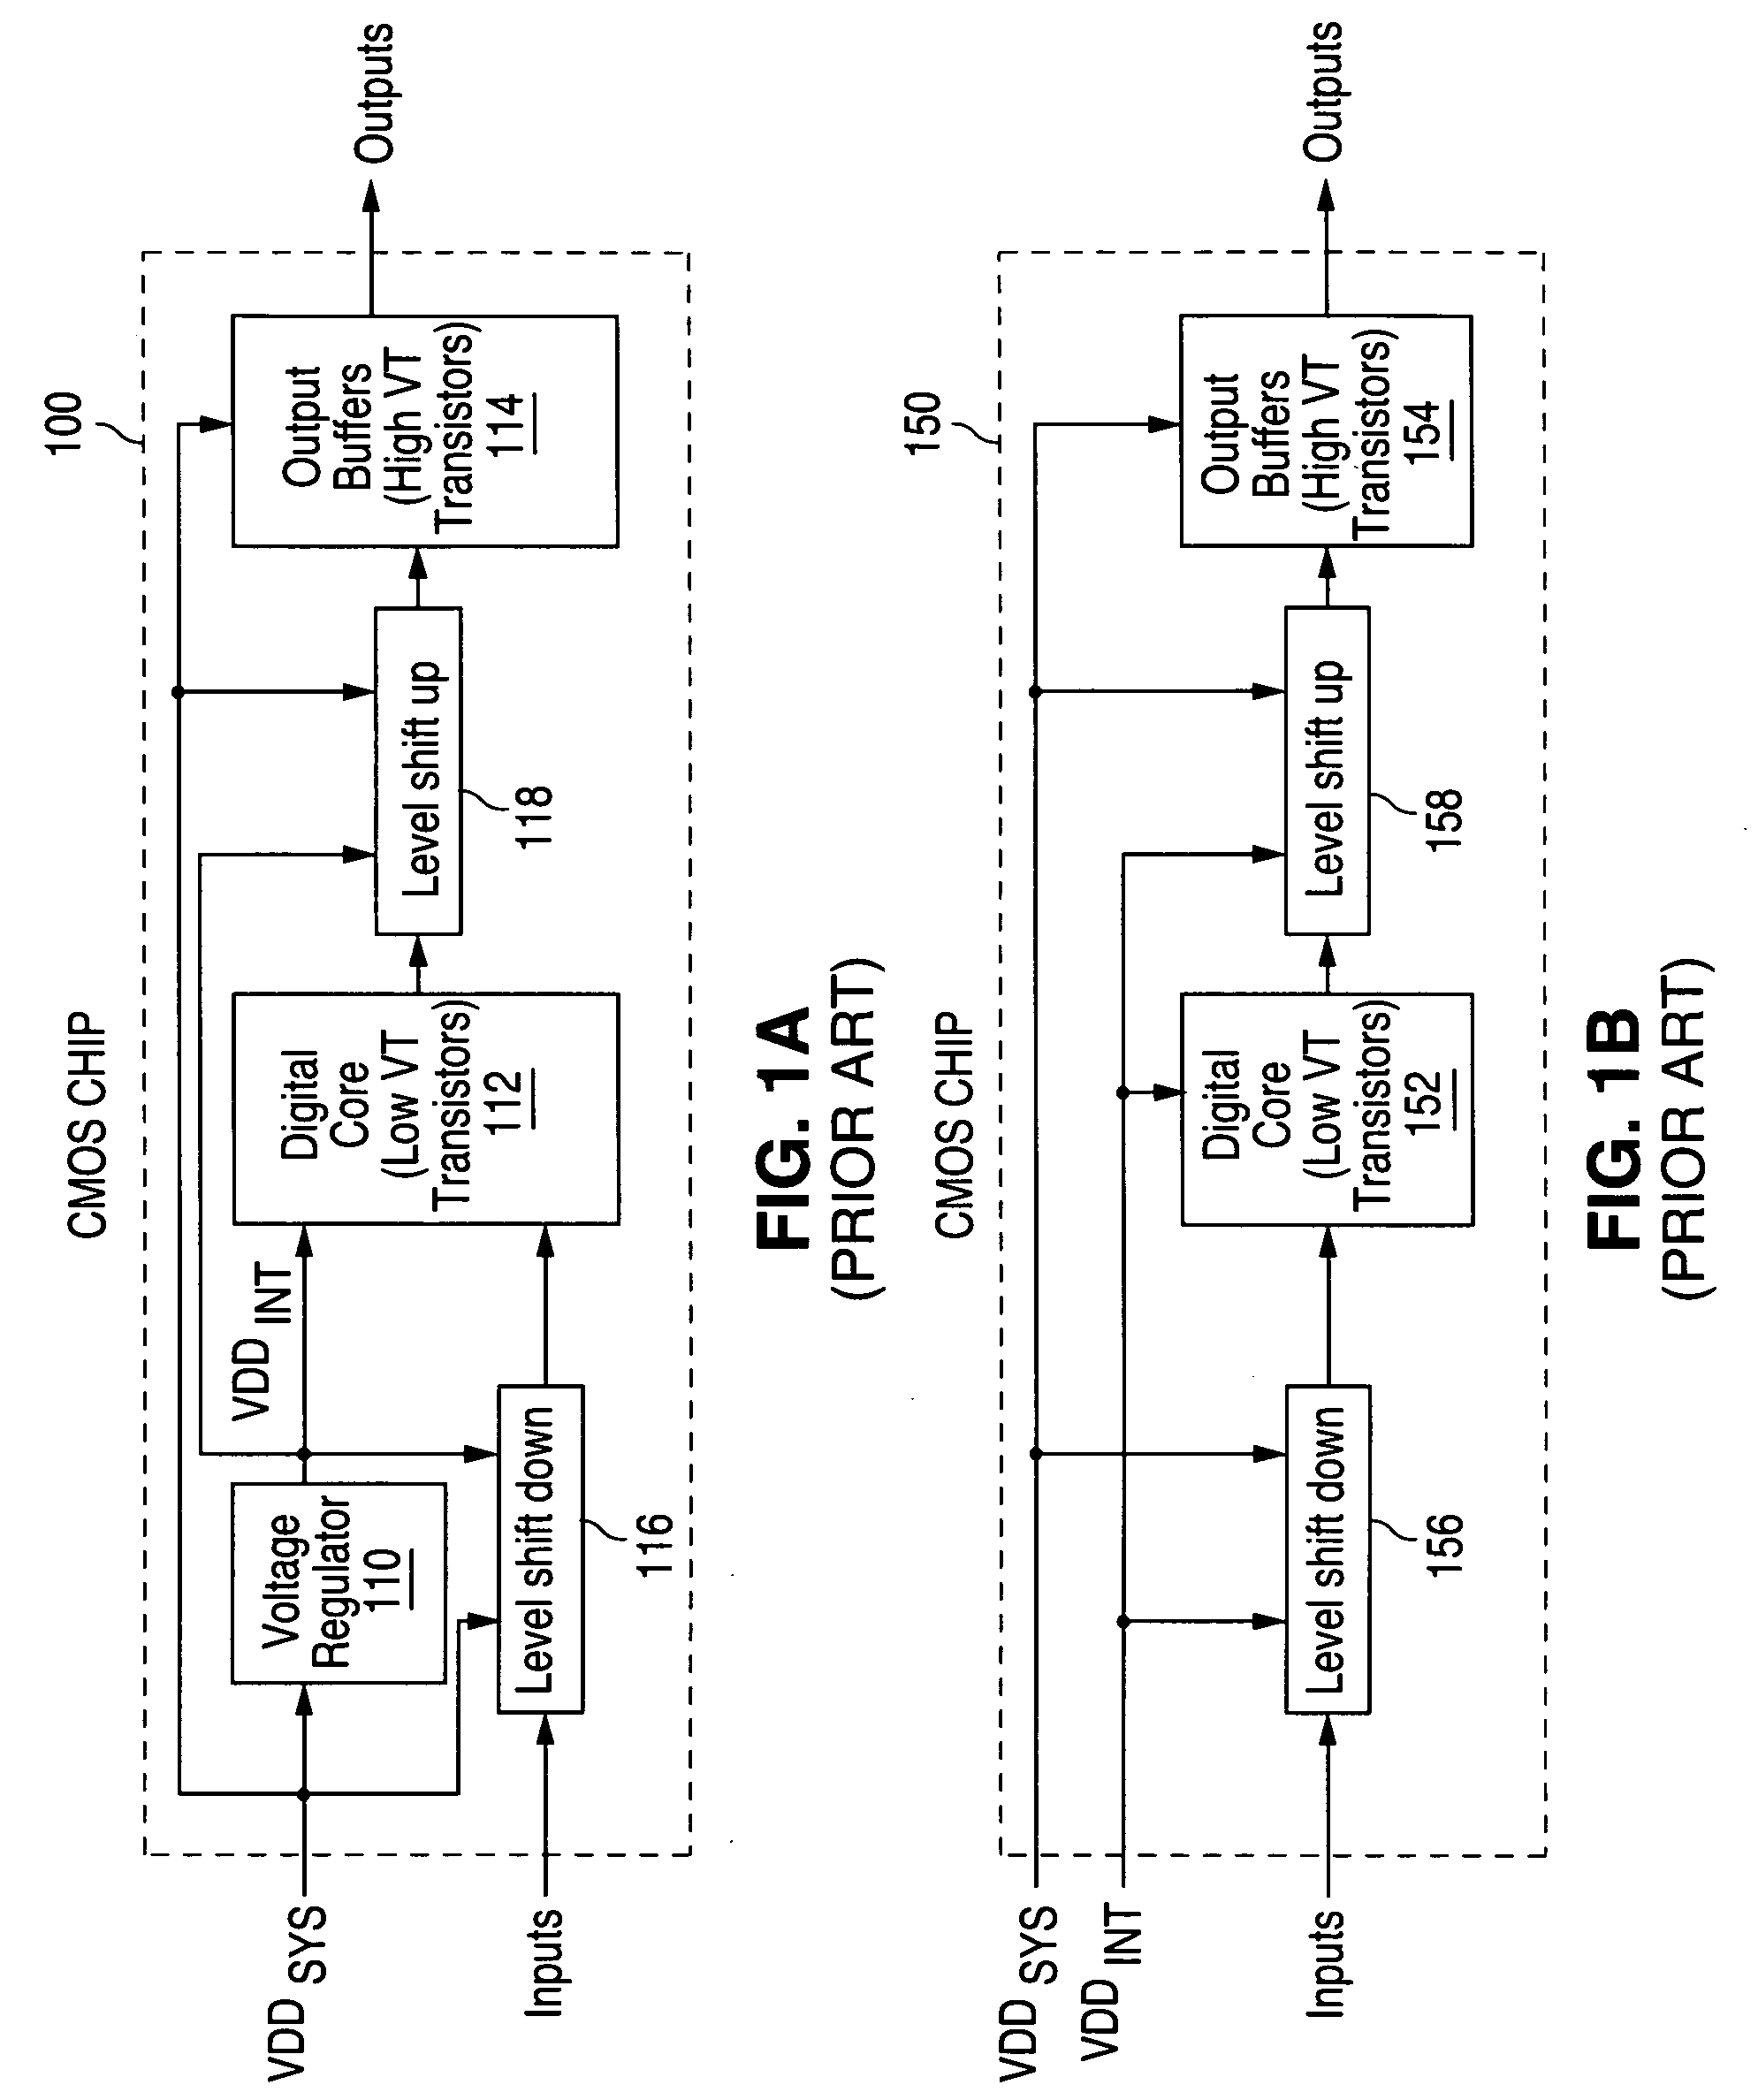 High voltage CMOS output buffer constructed from low voltage CMOS transistors